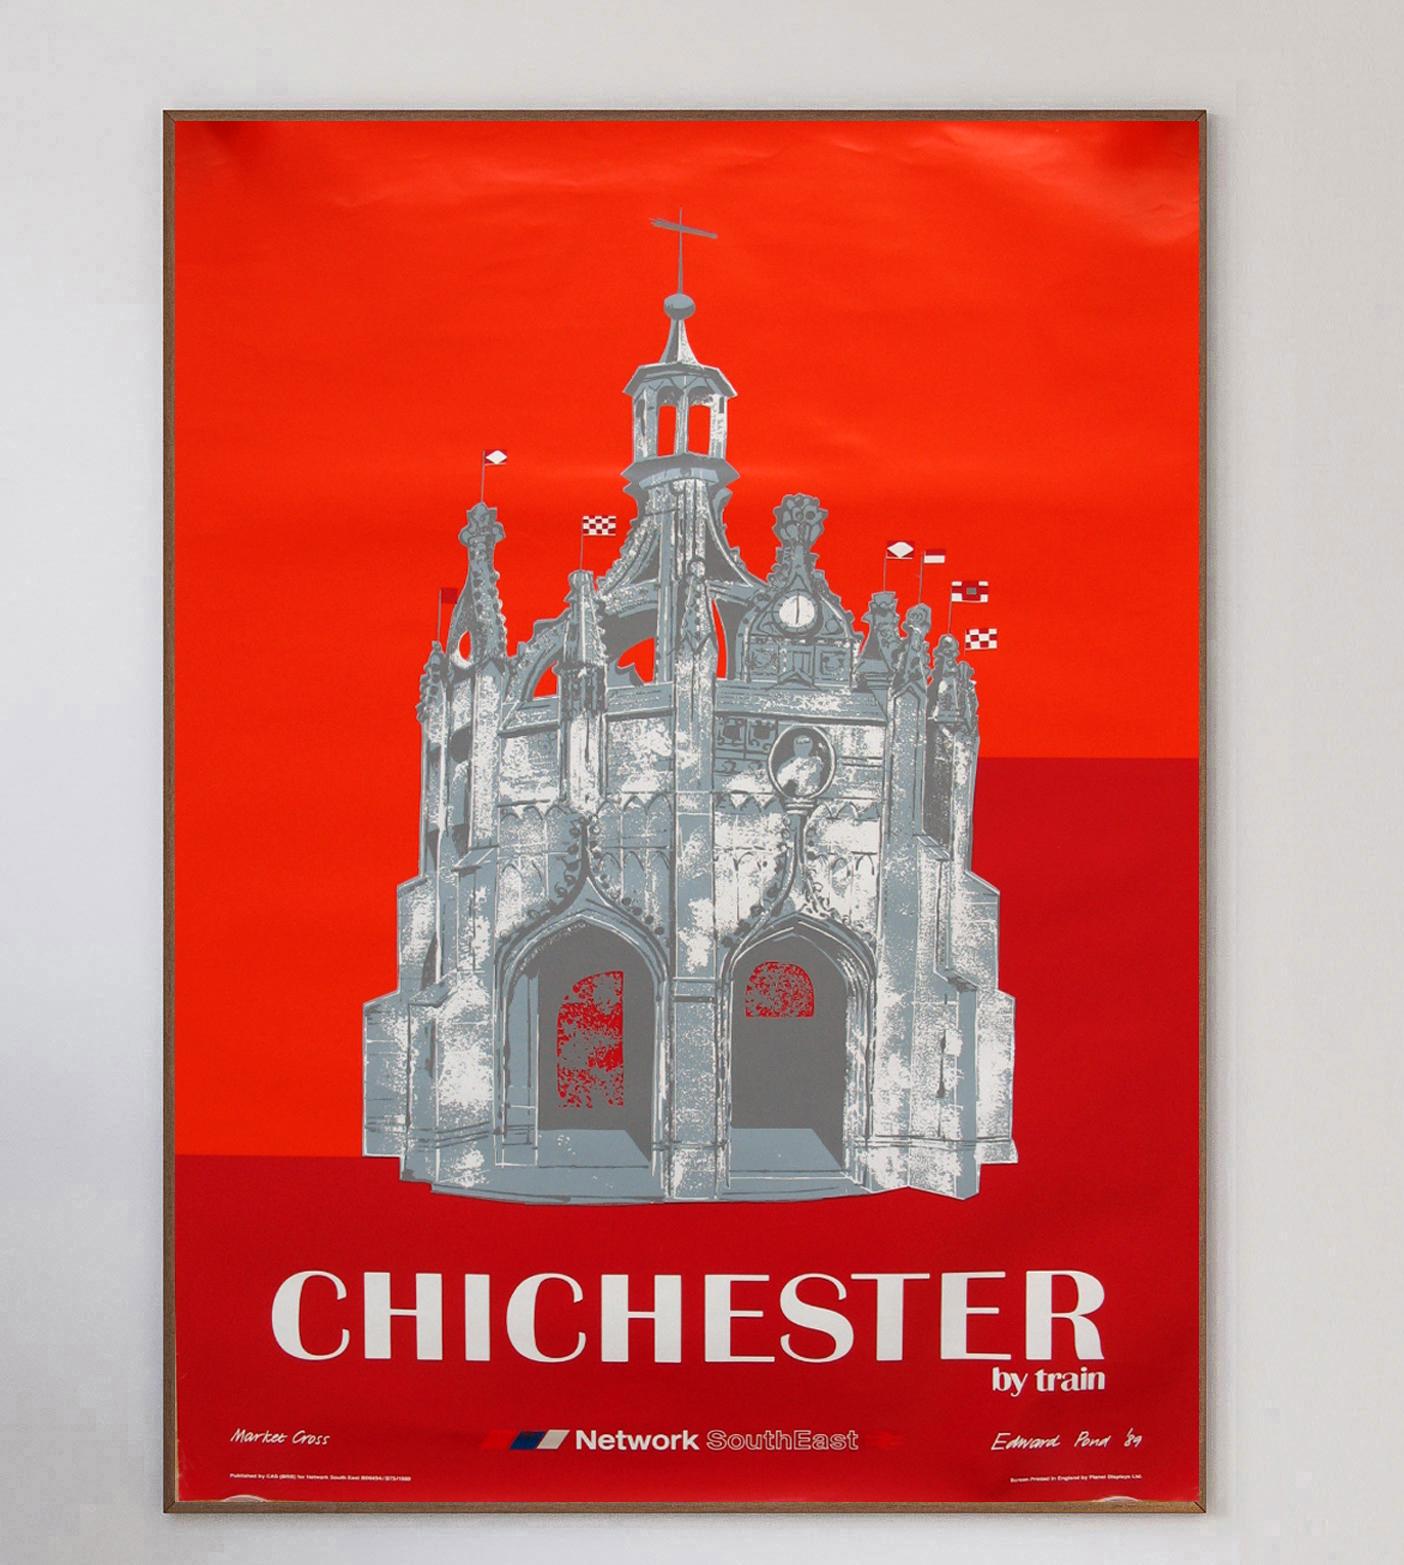 This beautiful poster was created in 1989 to promote British Railways new Network SouthEast region, and routes to the historic city of Chichester in West Sussex, England. The vibrant red design depicts the Market Cross in the city centre of